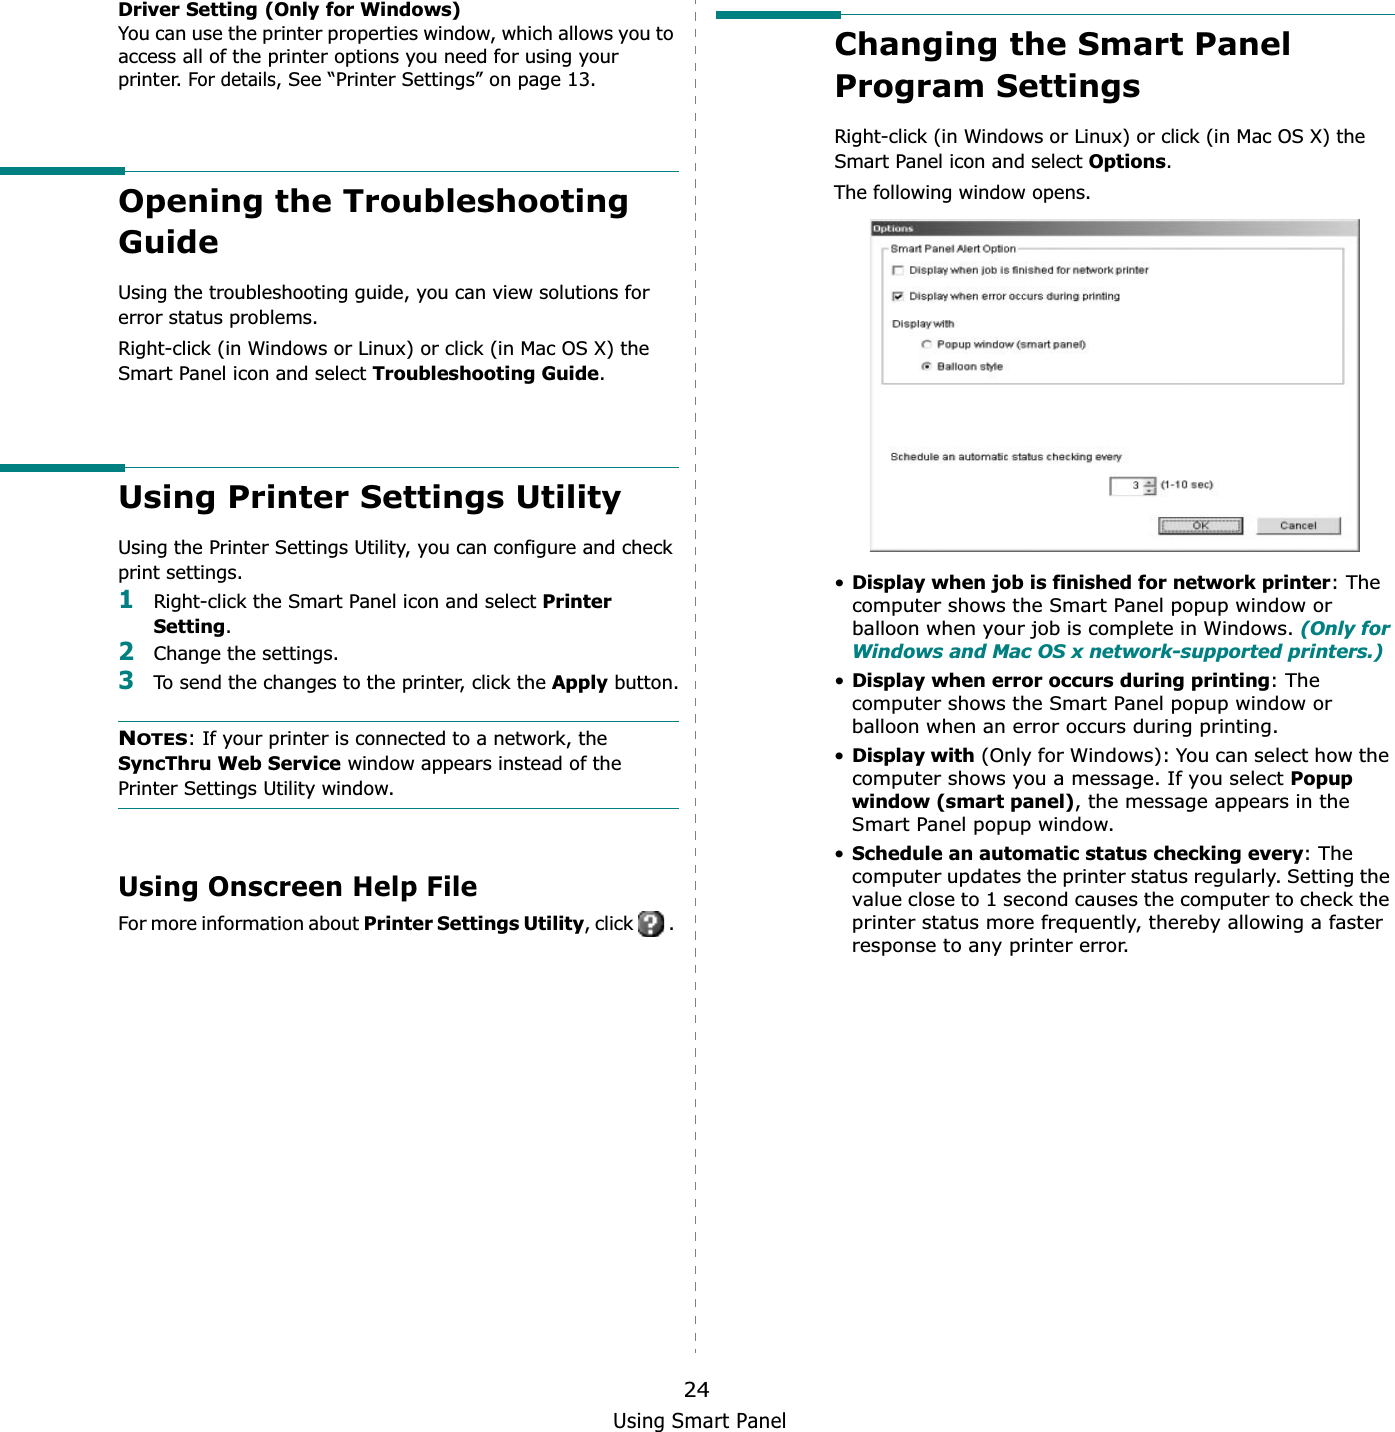 Using Smart Panel24Driver Setting (Only for Windows)You can use the printer properties window, which allows you to access all of the printer options you need for using your printer. For details, See “Printer Settings” on page 13.Opening the Troubleshooting GuideUsing the troubleshooting guide, you can view solutions for error status problems.Right-click (in Windows or Linux) or click (in Mac OS X) the Smart Panel icon and select Troubleshooting Guide.Using Printer Settings UtilityUsing the Printer Settings Utility, you can configure and check print settings. 1Right-click the Smart Panel icon and select Printer Setting.2Change the settings. 3To send the changes to the printer, click the Apply button.NOTES: If your printer is connected to a network, the SyncThru Web Service window appears instead of the Printer Settings Utility window.Using Onscreen Help FileFor more information about Printer Settings Utility, click   . Changing the Smart Panel Program SettingsRight-click (in Windows or Linux) or click (in Mac OS X) the Smart Panel icon and select Options.The following window opens.•Display when job is finished for network printer: The computer shows the Smart Panel popup window or balloon when your job is complete in Windows. (Only for Windows and Mac OS x network-supported printers.)•Display when error occurs during printing: The computer shows the Smart Panel popup window or balloon when an error occurs during printing.•Display with (Only for Windows): You can select how the computer shows you a message. If you select Popup window (smart panel), the message appears in the Smart Panel popup window.•Schedule an automatic status checking every: The computer updates the printer status regularly. Setting the value close to 1 second causes the computer to check the printer status more frequently, thereby allowing a faster response to any printer error.